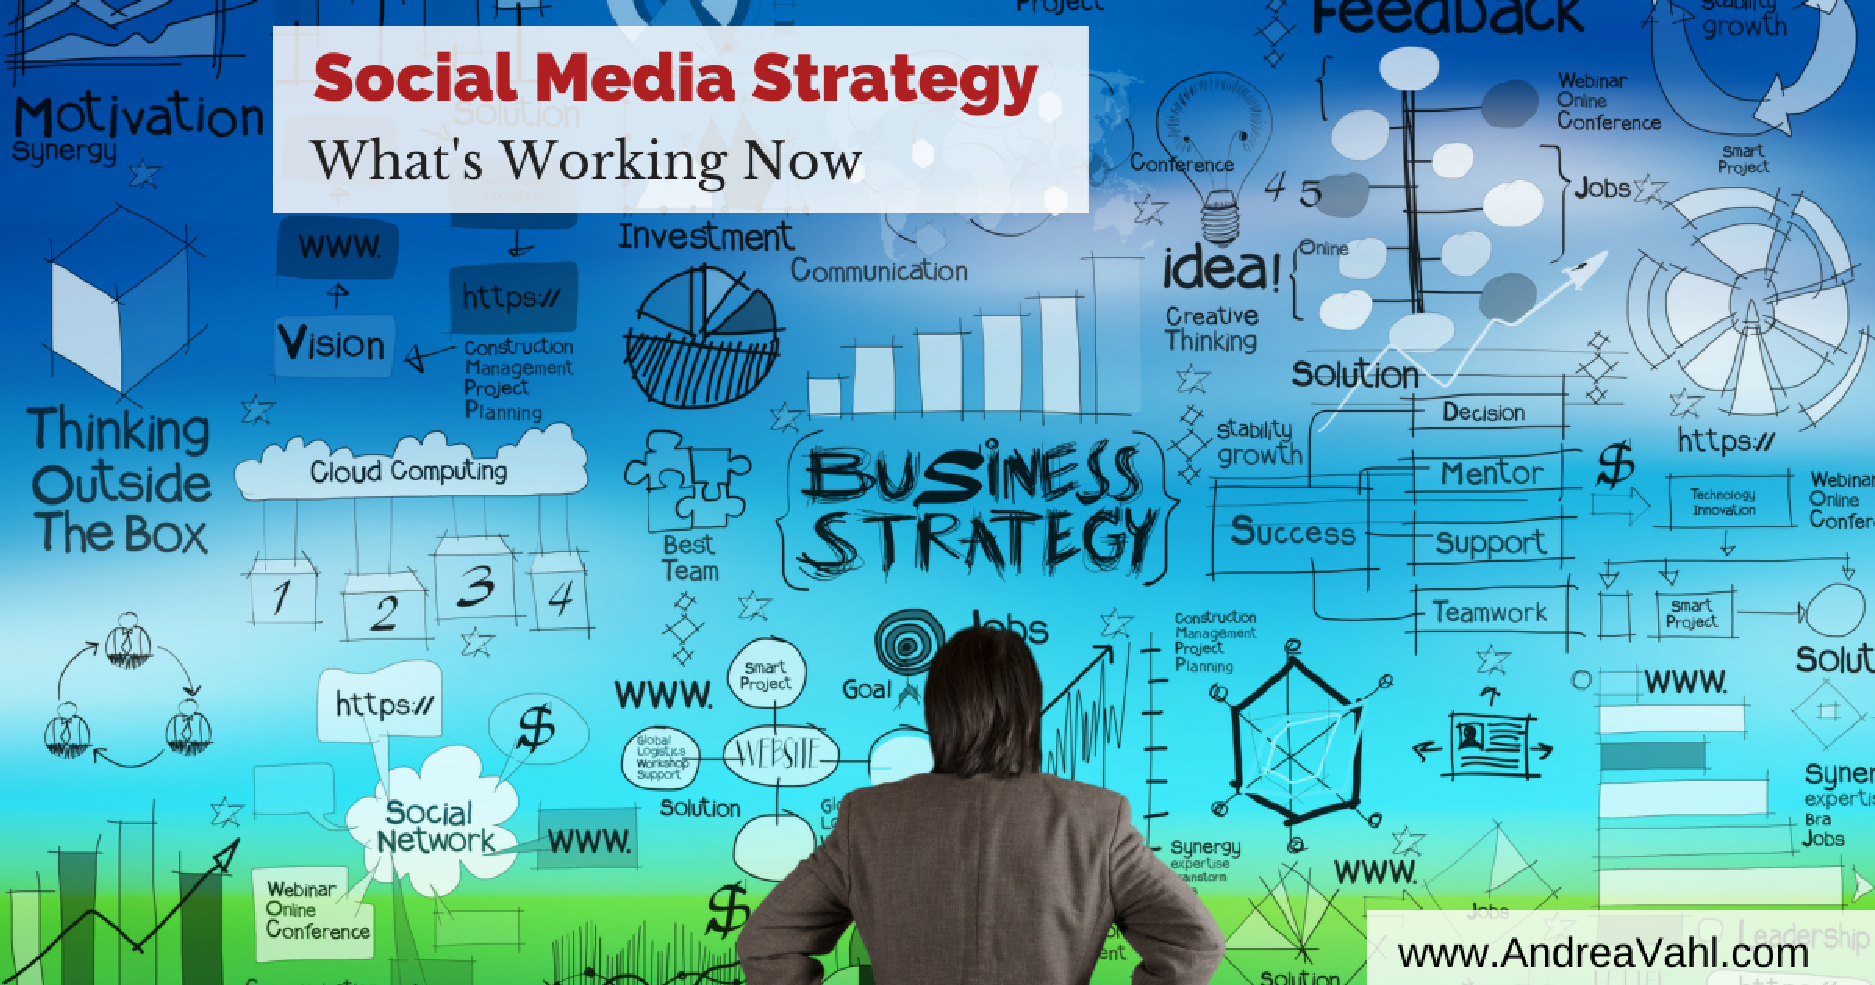 Social Media Strategy - What is Working Now